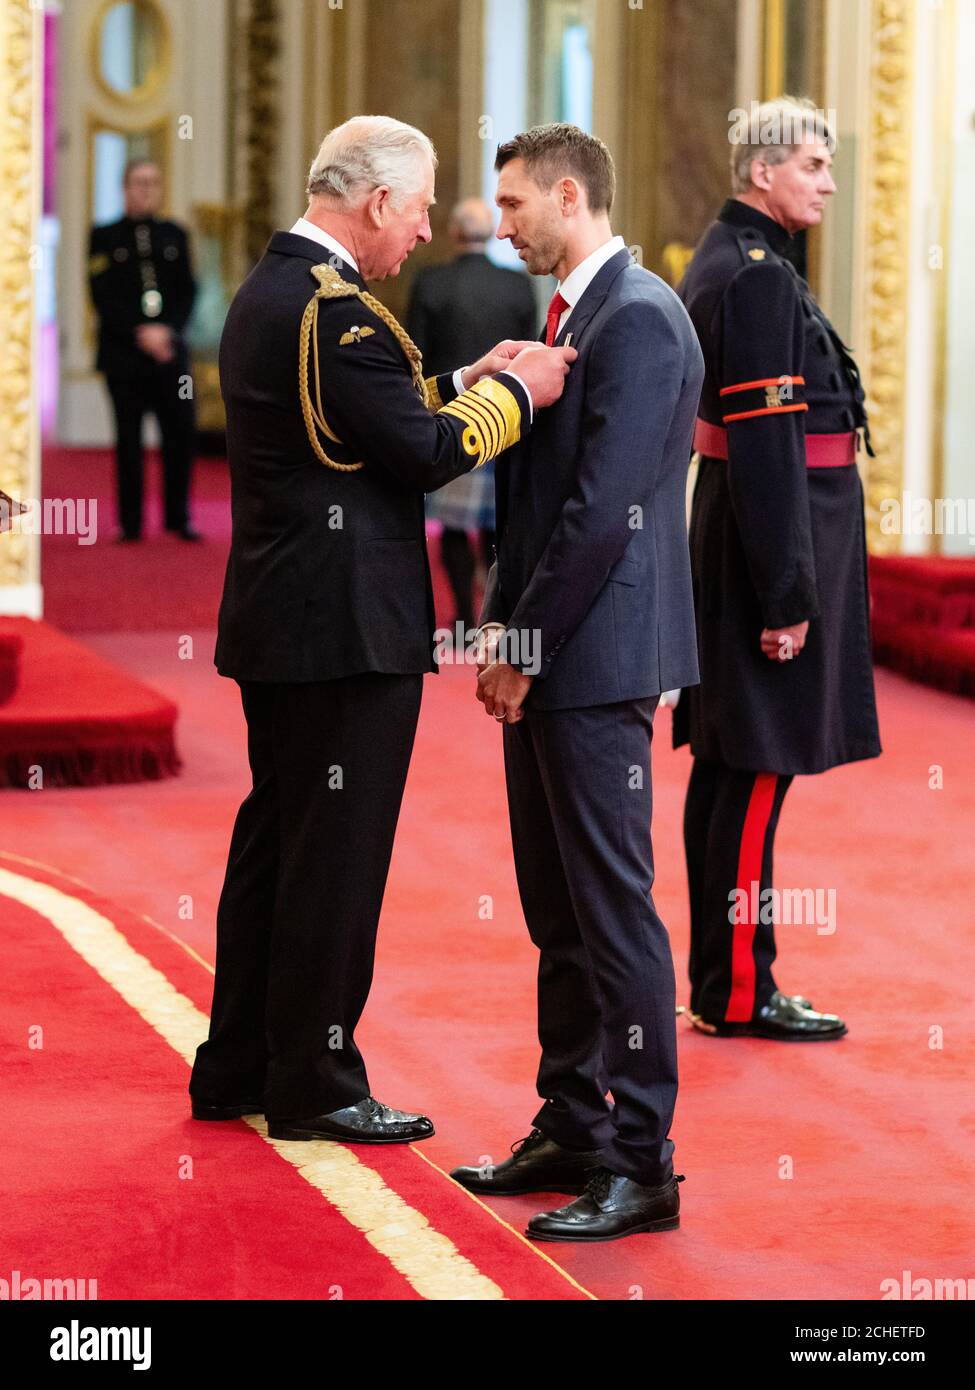 Mr. Gareth McAuley from Woodhouse is made an MBE (Member of the Order of the British Empire) by the Prince of Wales at Buckingham Palace. PRESS ASSOCIATION Photo. Picture date: Thursday May 16, 2019. See PA story ROYAL Investiture. Photo credit should read: Dominic Lipinski/PA Wire Stock Photo